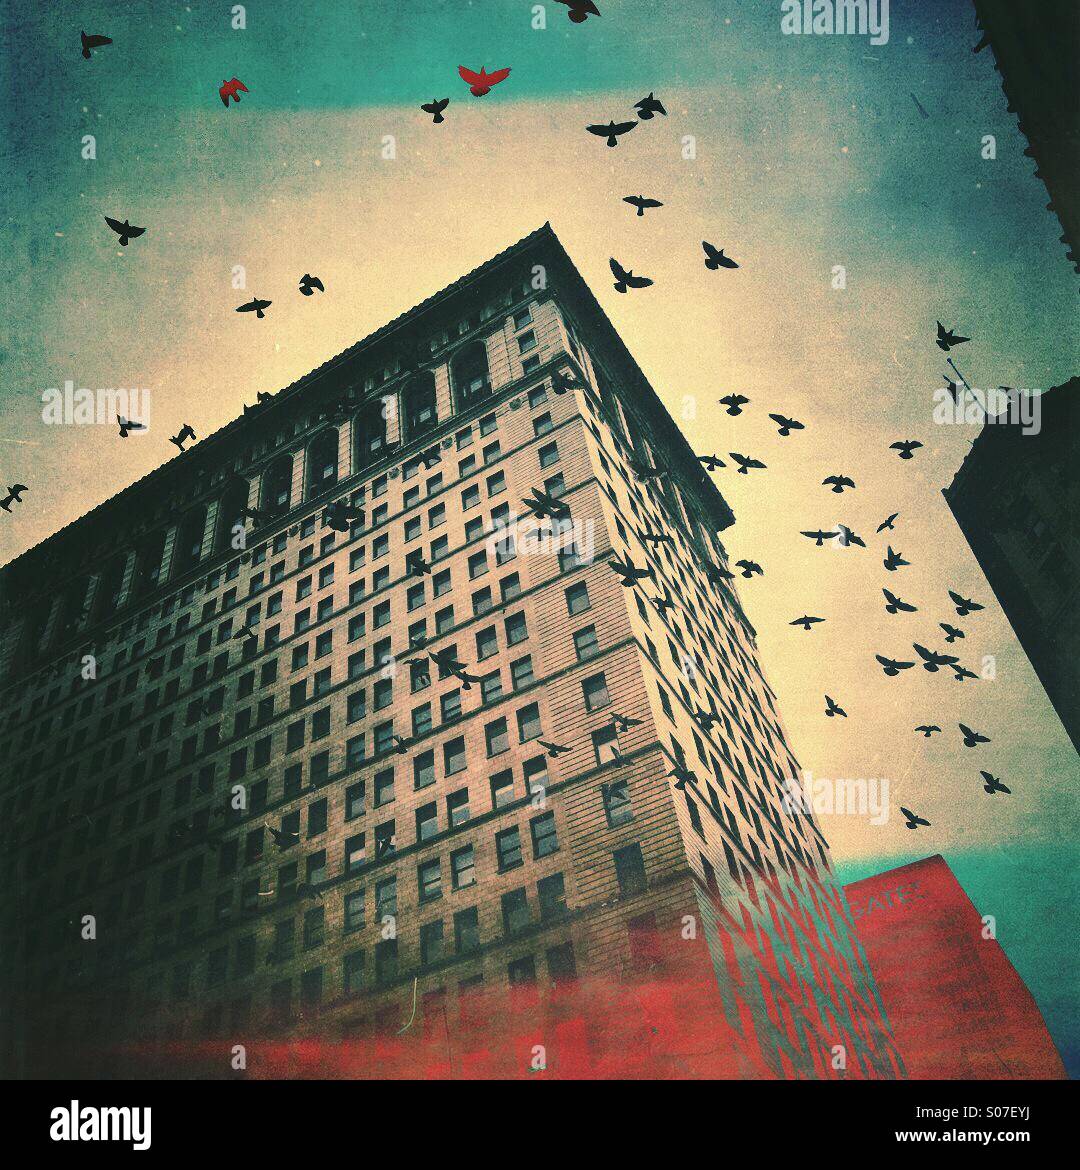 An abstract image of a flock of birds flying between urban buildings. Stock Photo